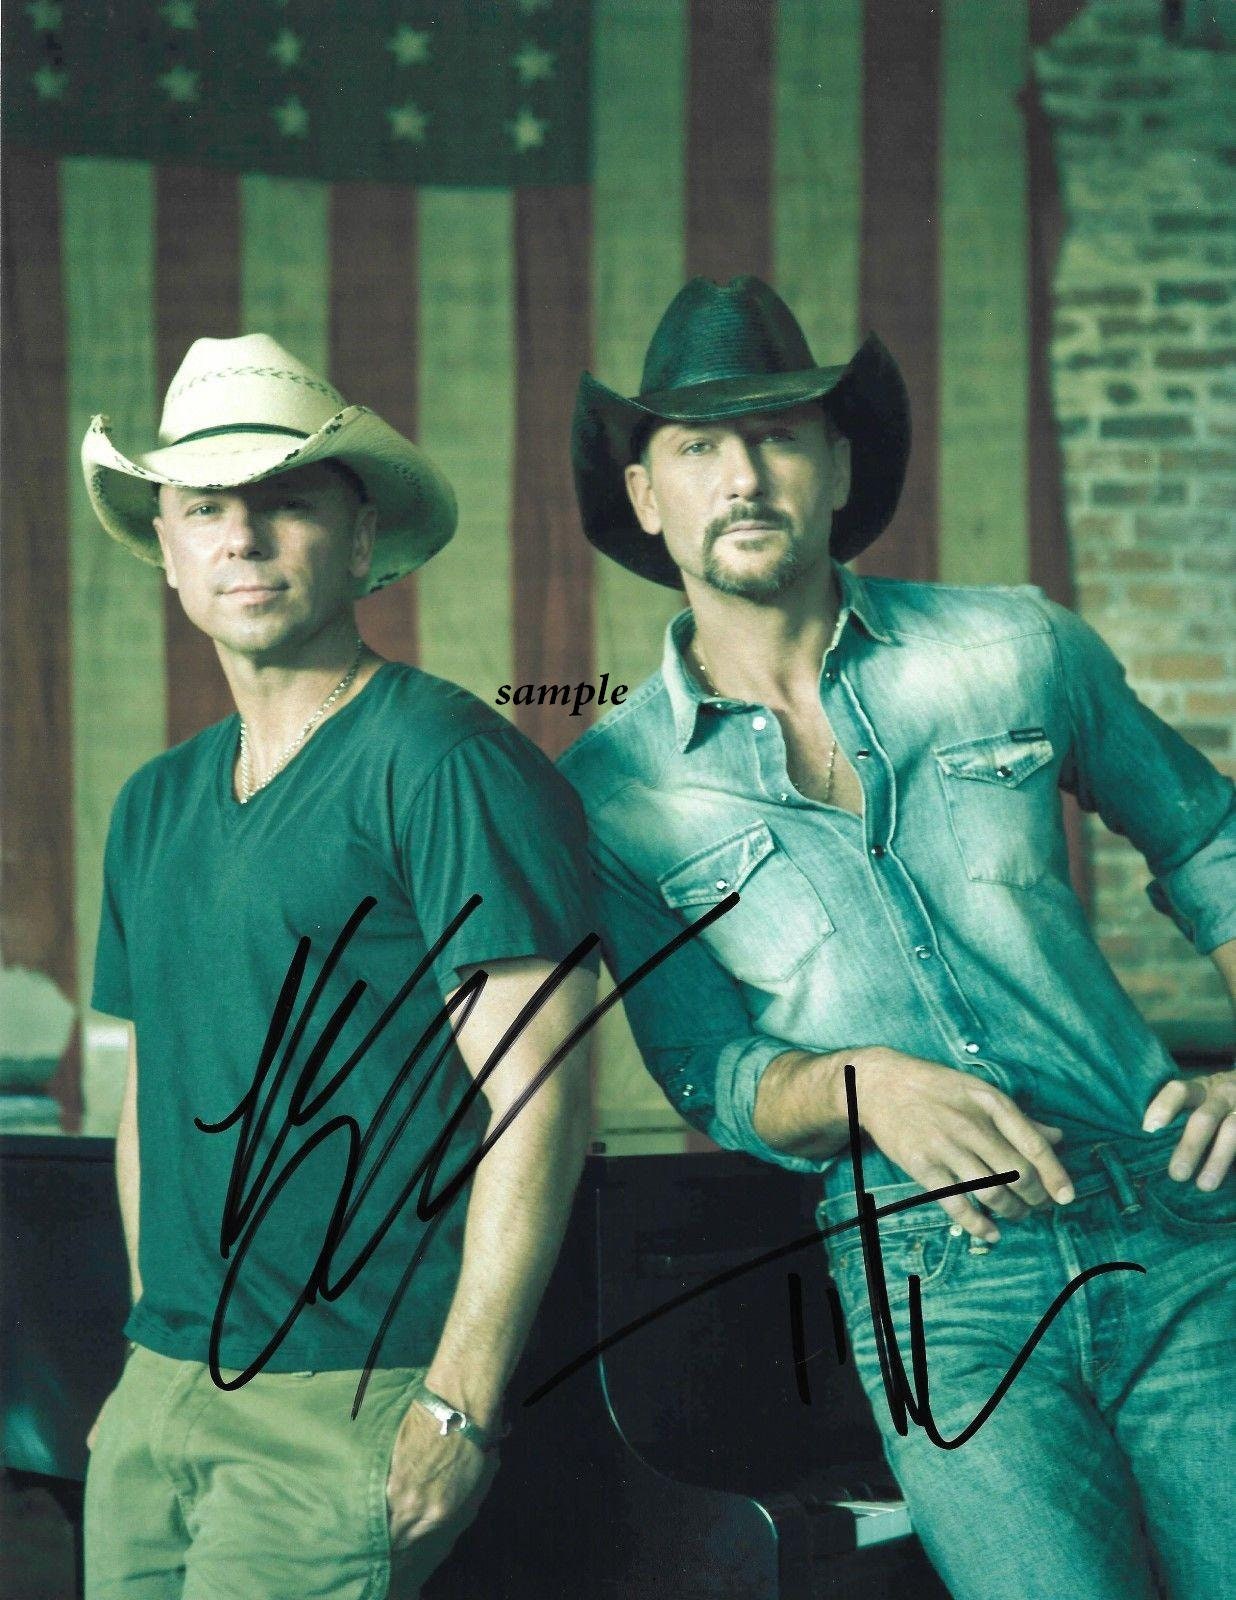 2 AUTOGRAPHED PICTURE SIGNED 8X10 PHOTO REPRINT TIM MCGRAW 